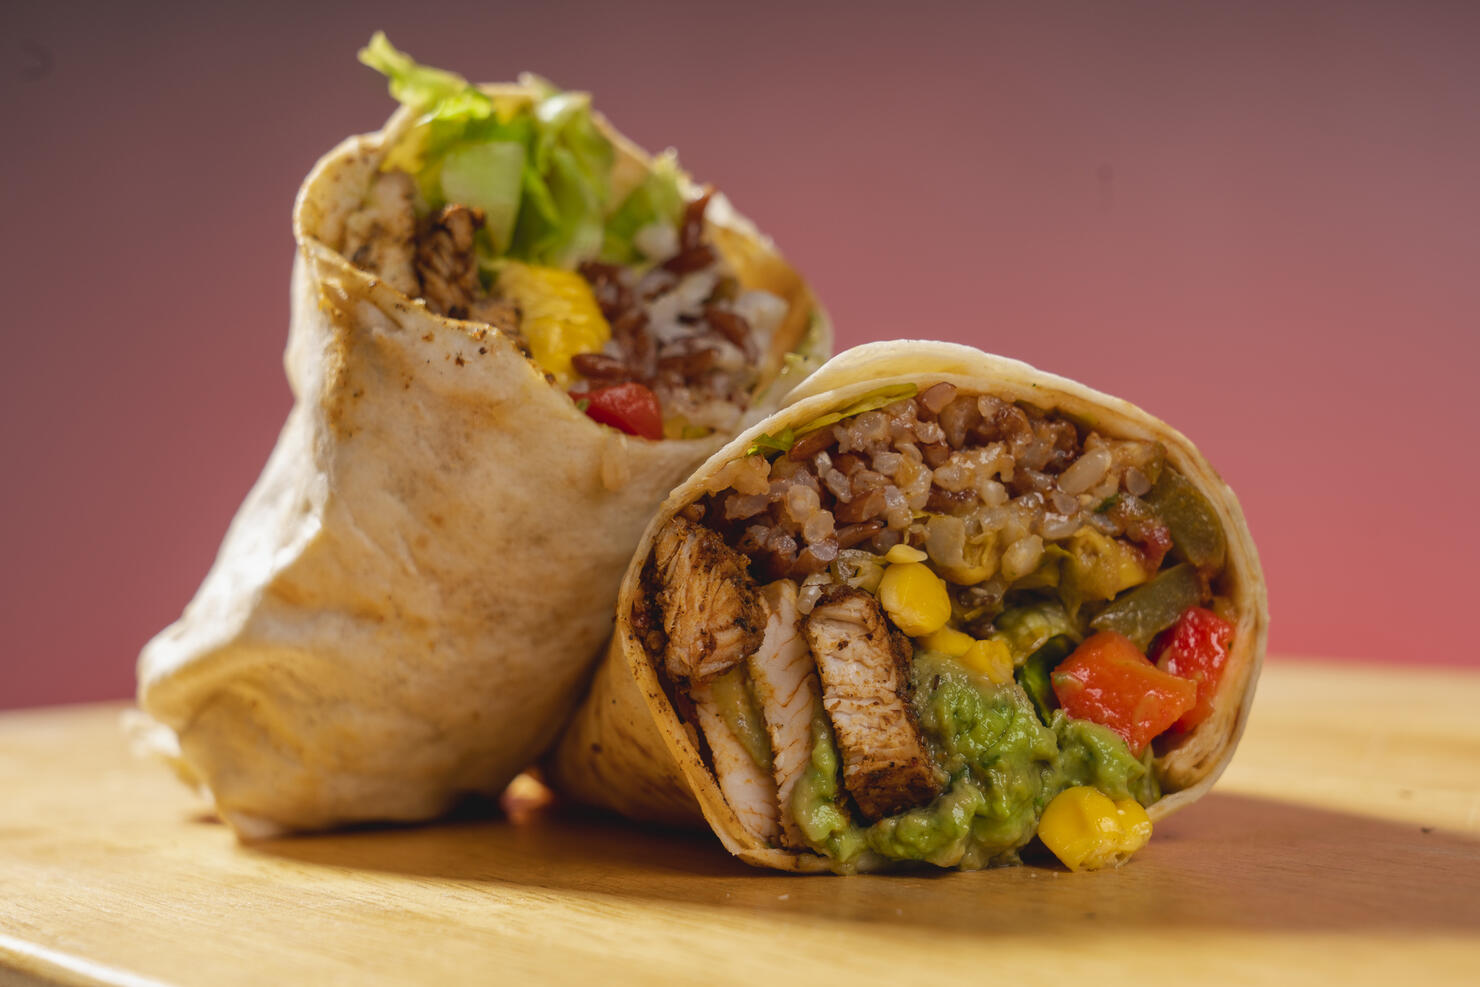 Barbecue chicken, corn and guacamole tortilla wraps on a wooden base. Vegetable burrito. Healthy food.